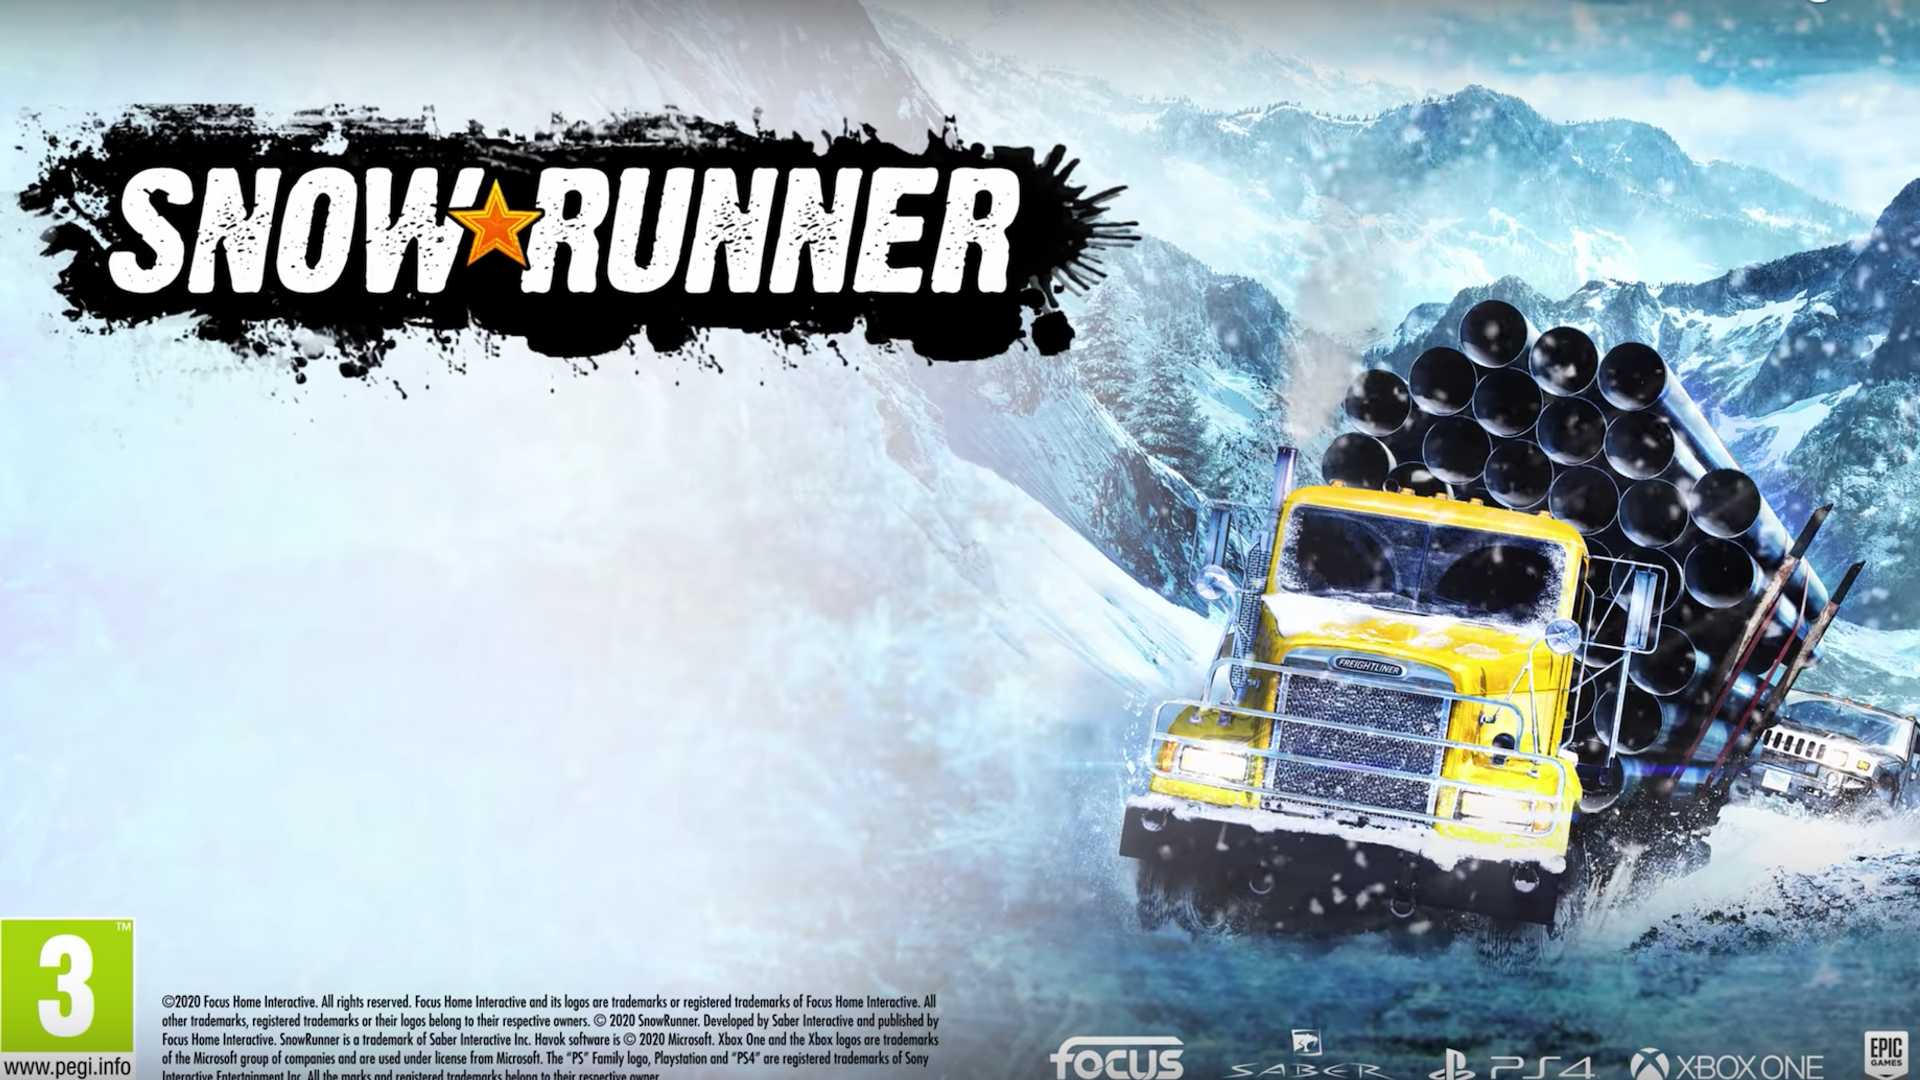 SnowRunner Is An Open World Video Game With Customizable Trucks